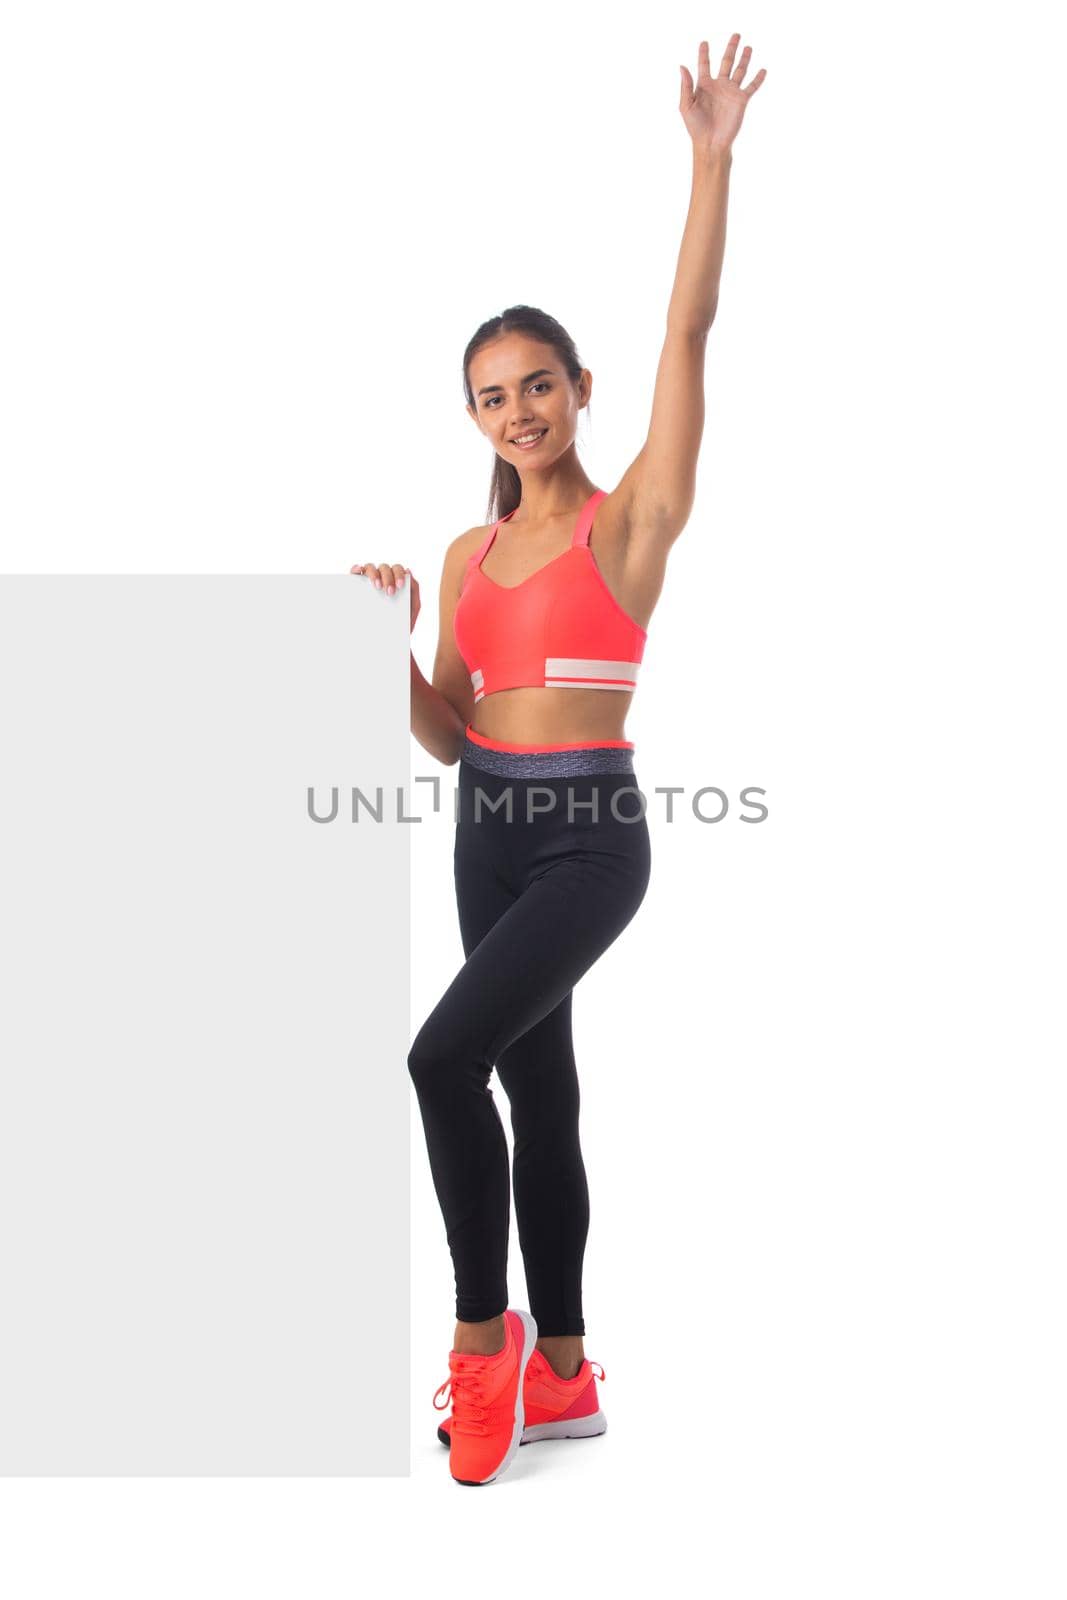 Healthy hispanic fitness girl with arm raised holding blank banner isolated on white background